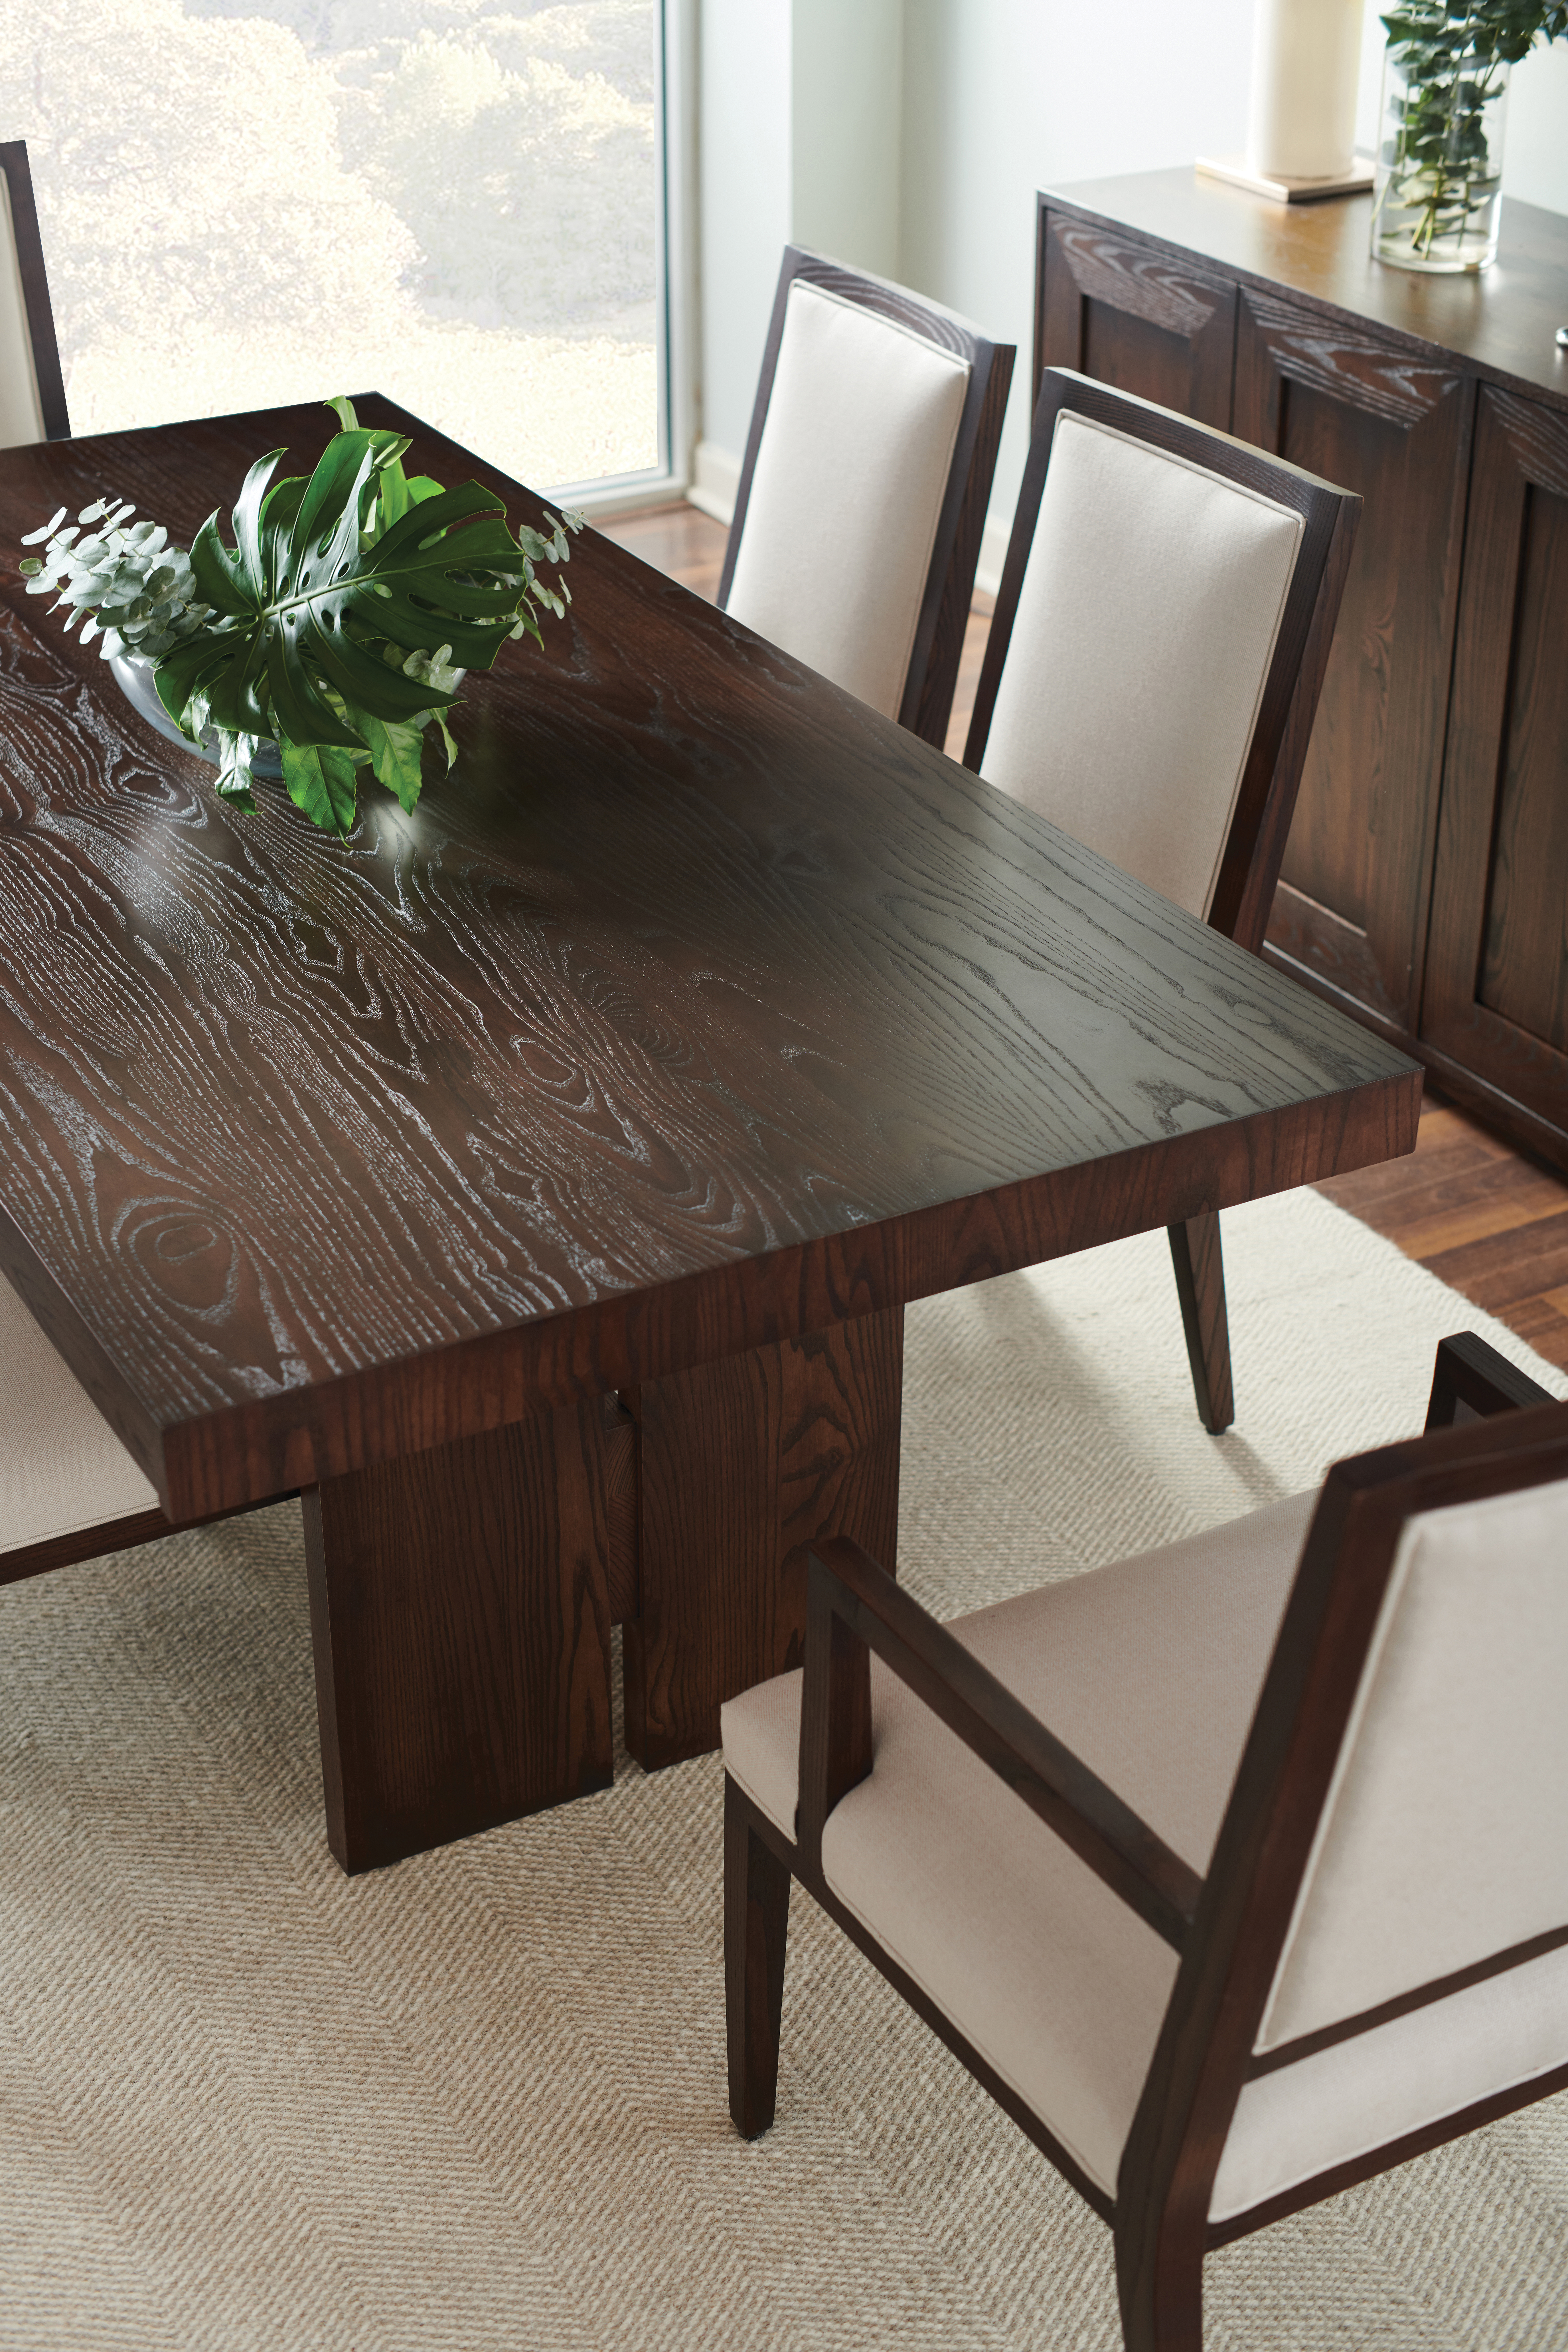 Gat Creek’s Wilson table in Ash displays the excellence of West Virginia workmanship in beautiful Appalachian Hardwoods.